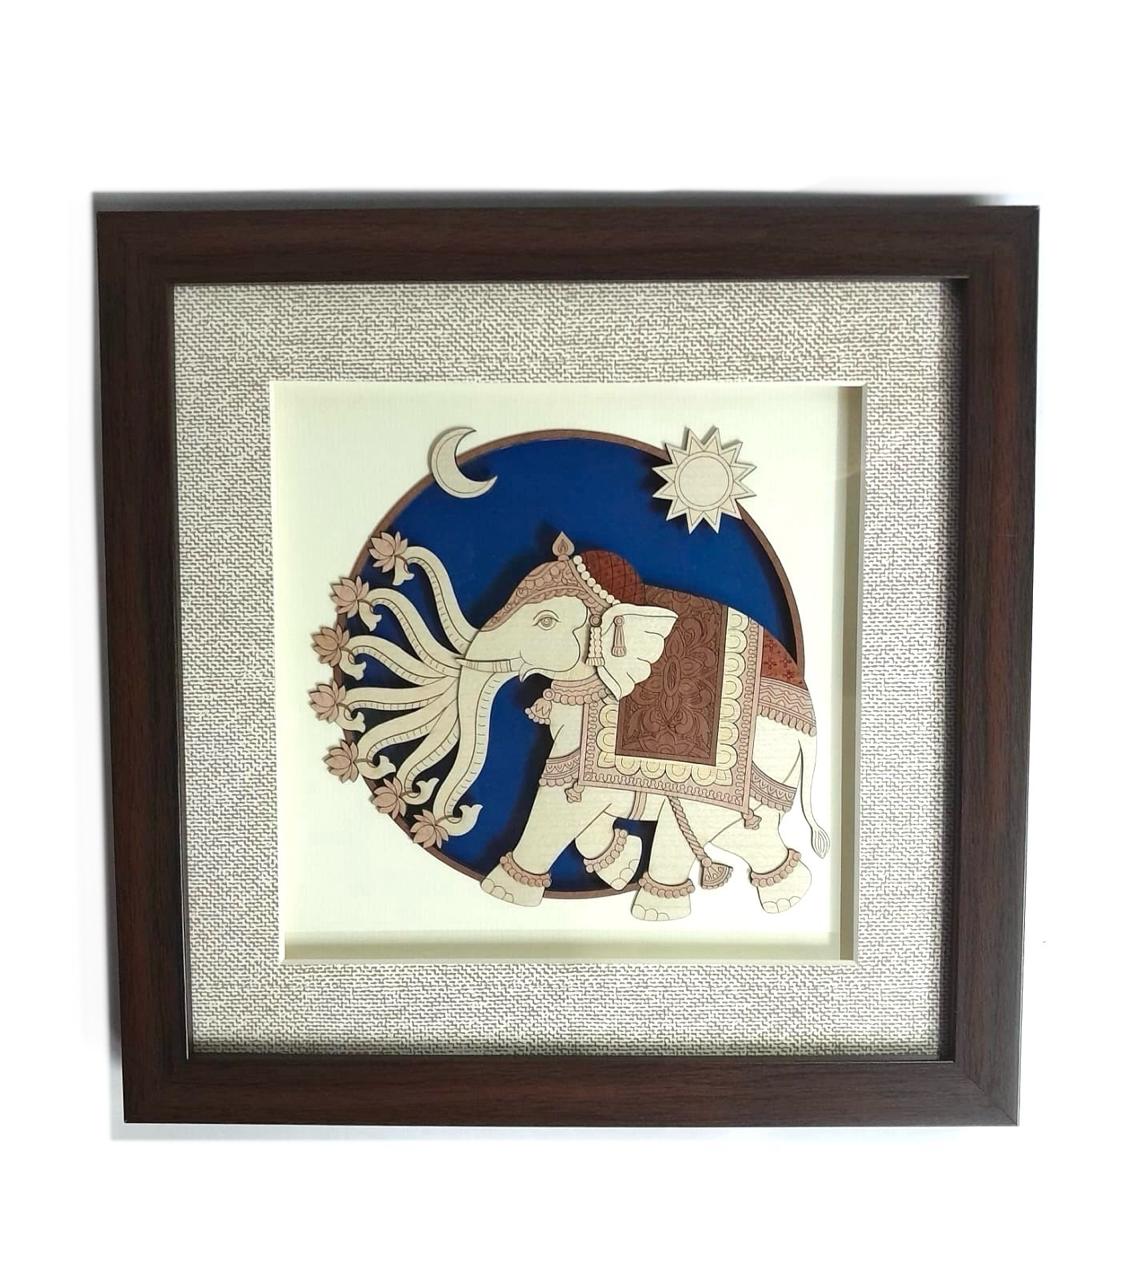 Airavata "King Of Elephants" With 7 Trunks Divine Wooden Art Wall Frame Tamrapatra